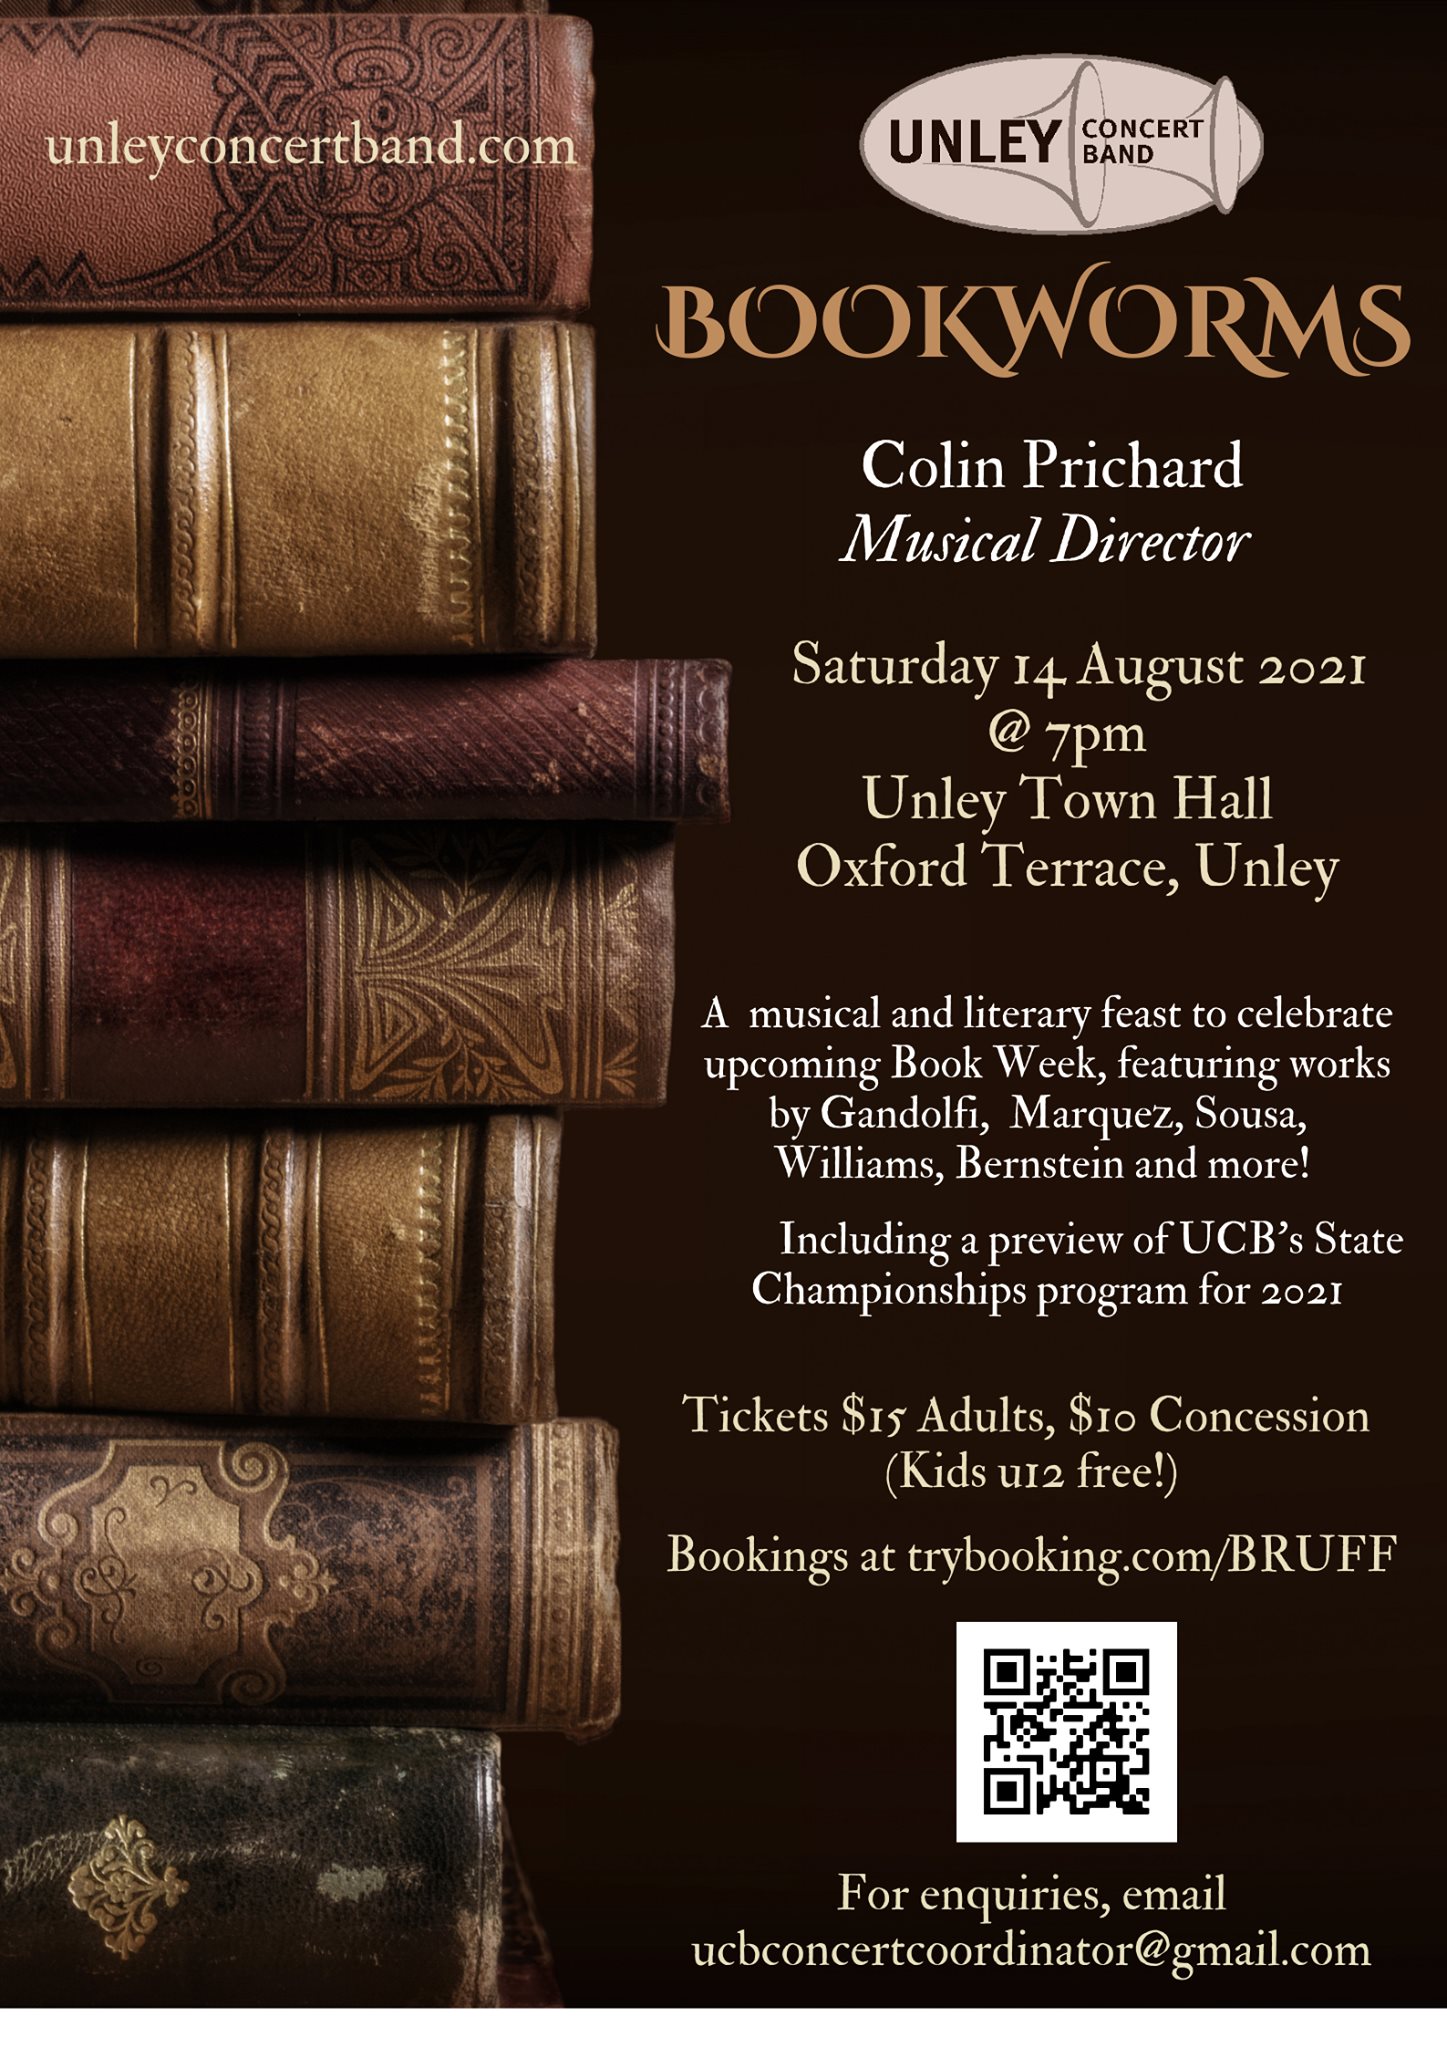 You are currently viewing Bookworms – A literary feast with Unley Concert Band